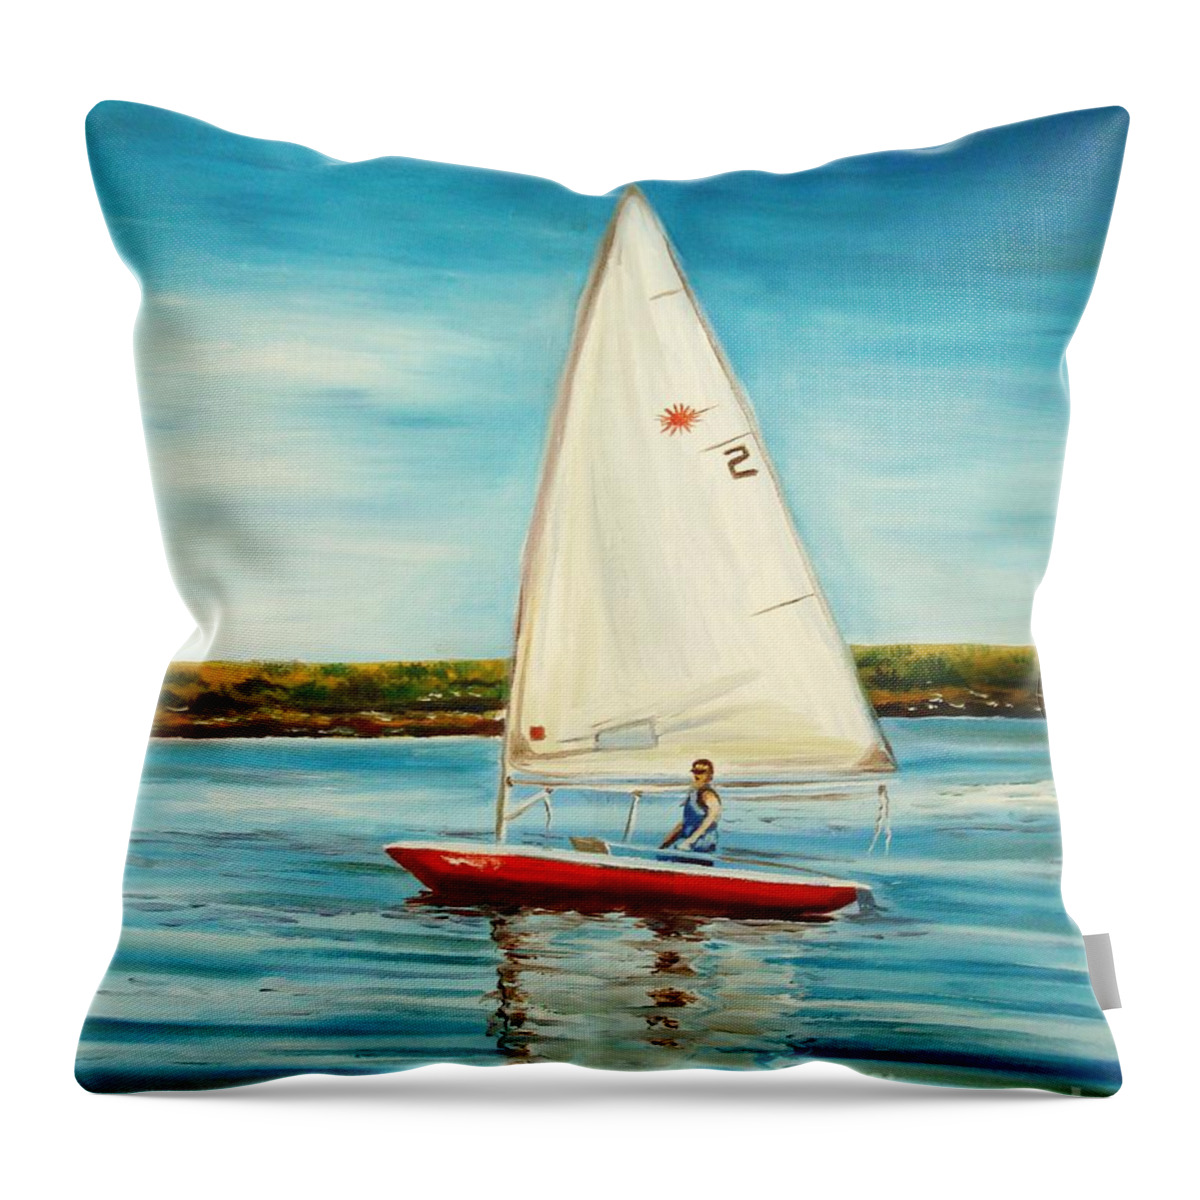 Water Throw Pillow featuring the painting His Laser by Elizabeth Robinette Tyndall